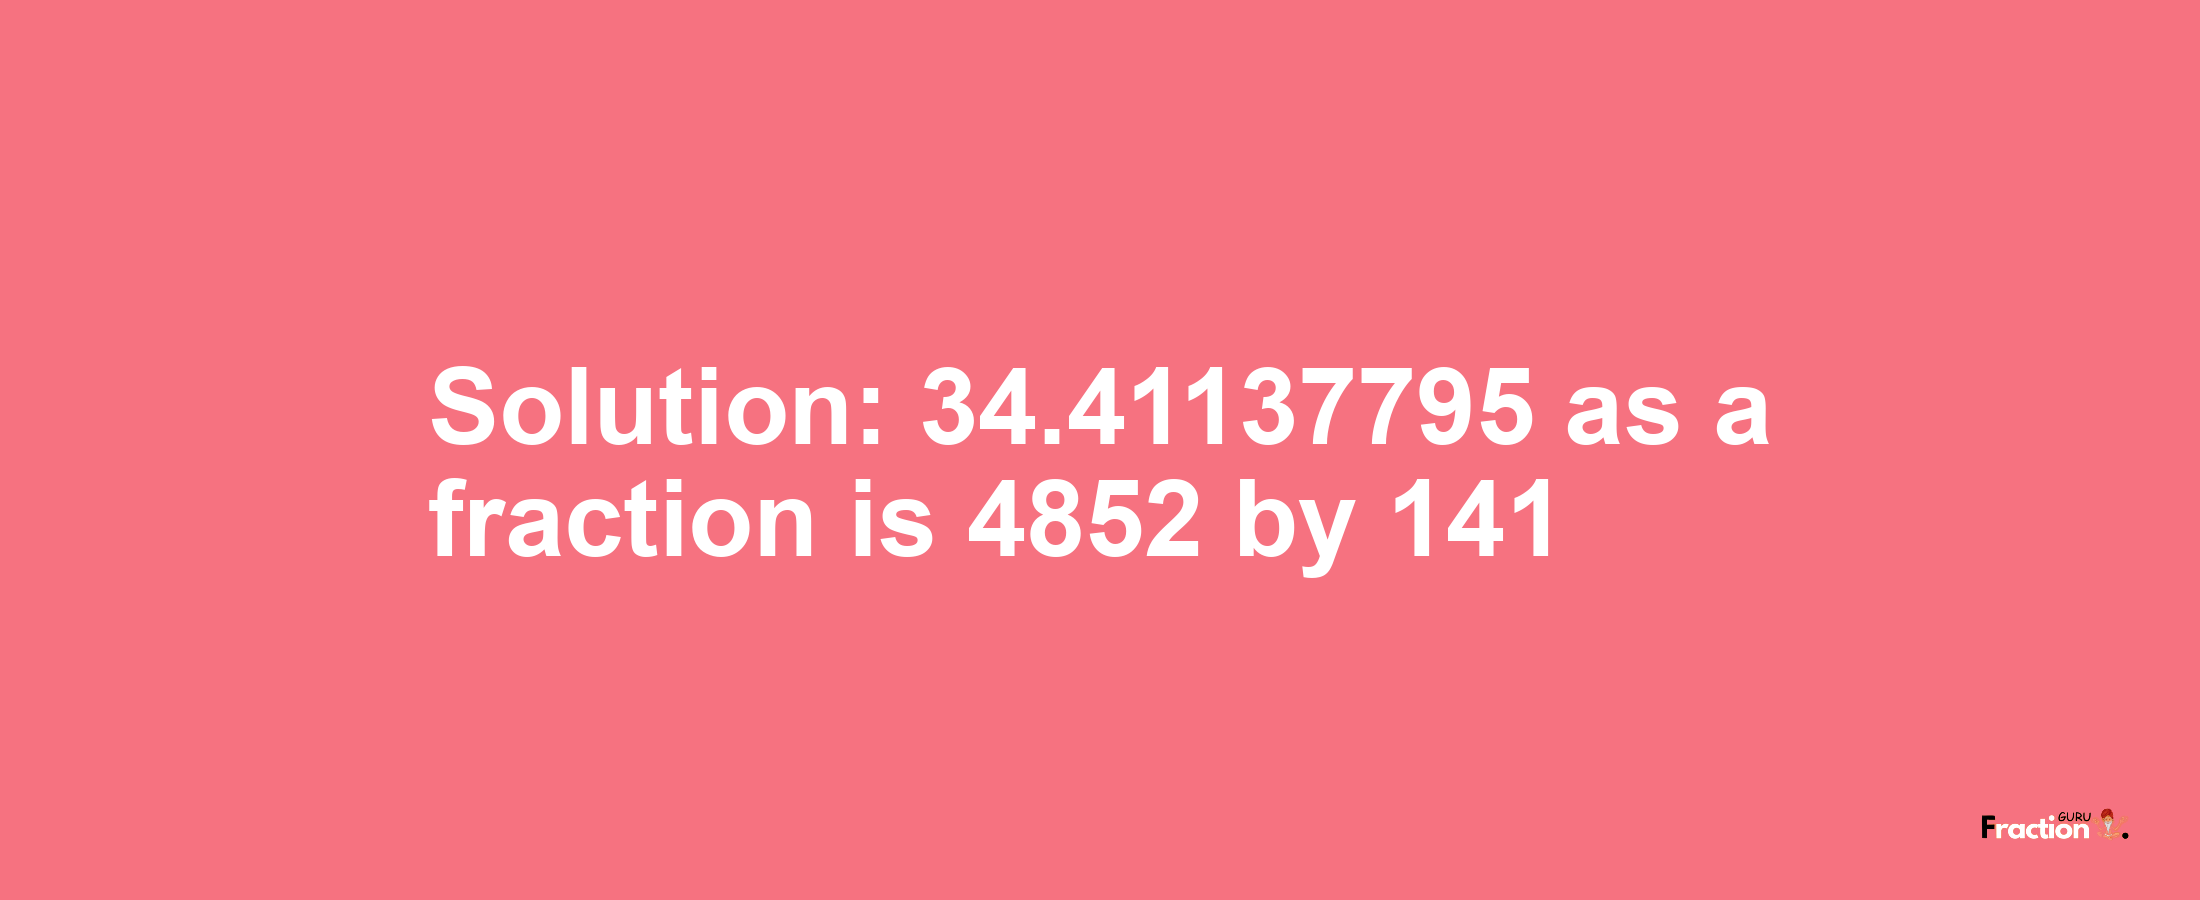 Solution:34.41137795 as a fraction is 4852/141